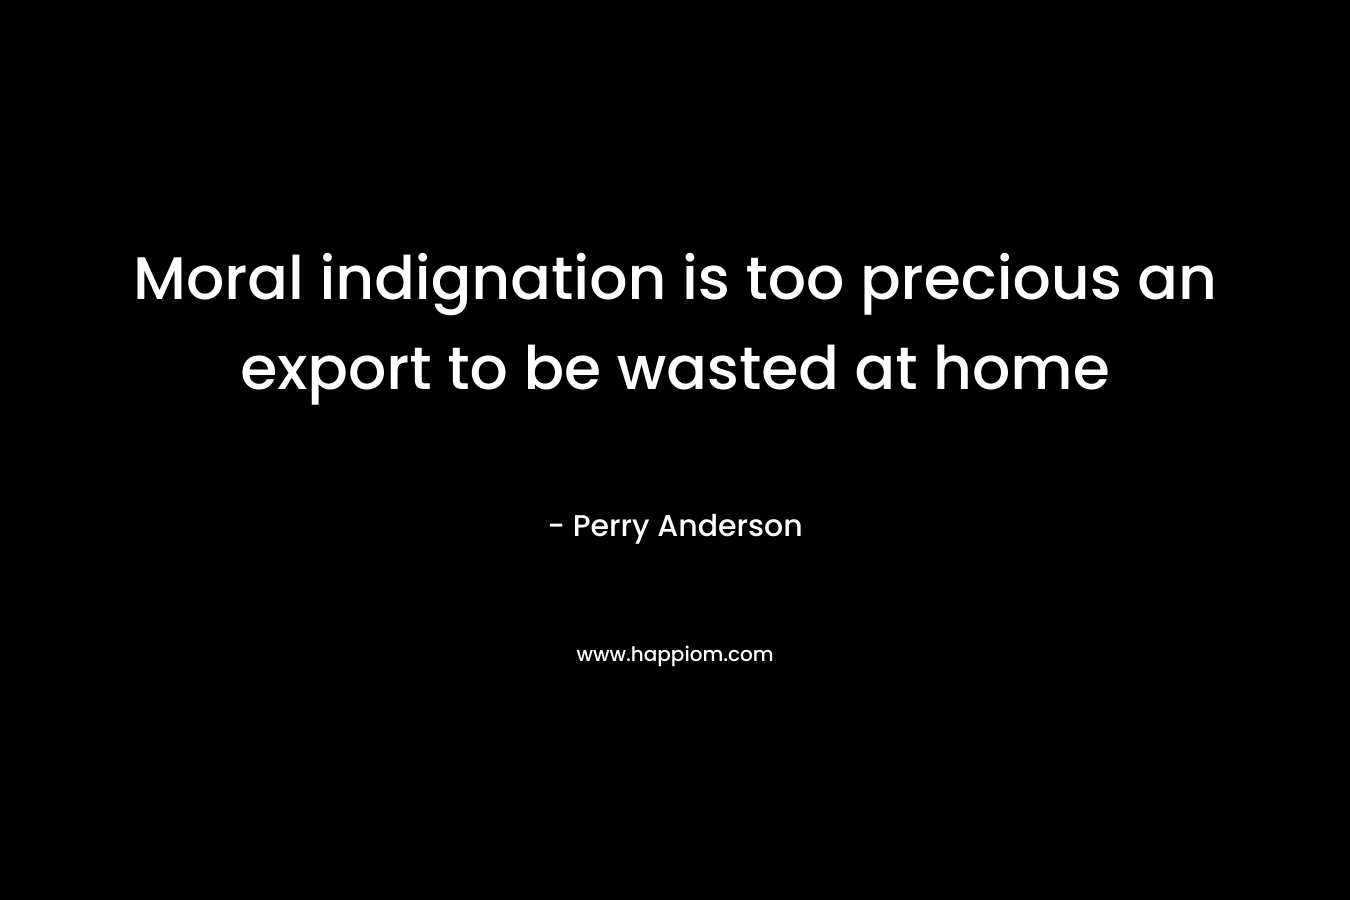 Moral indignation is too precious an export to be wasted at home